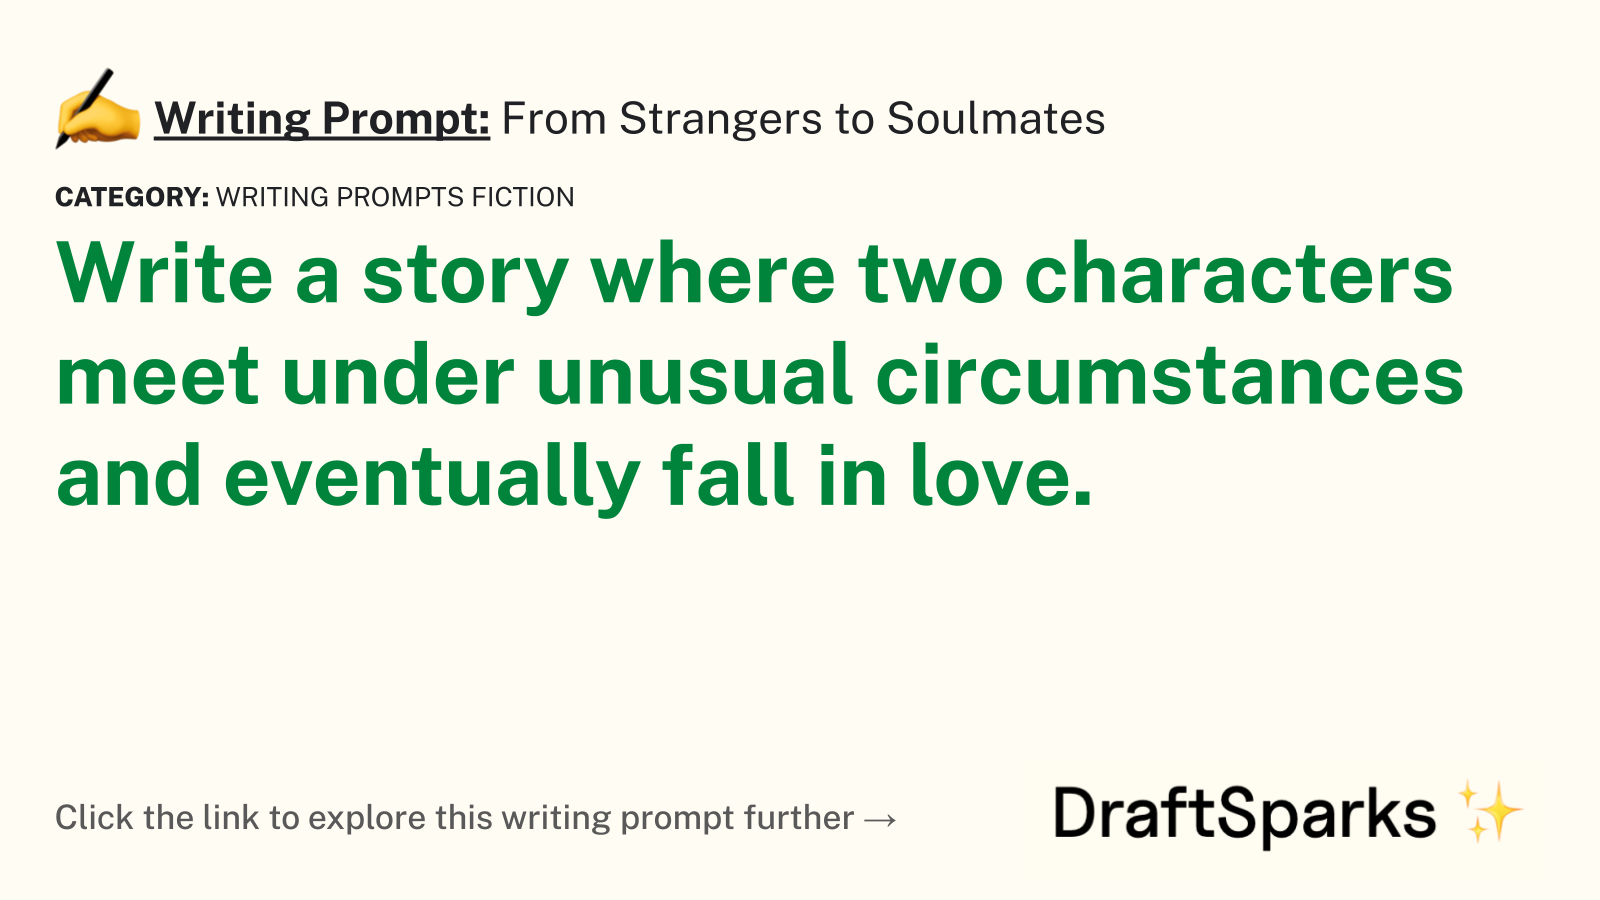 From Strangers to Soulmates